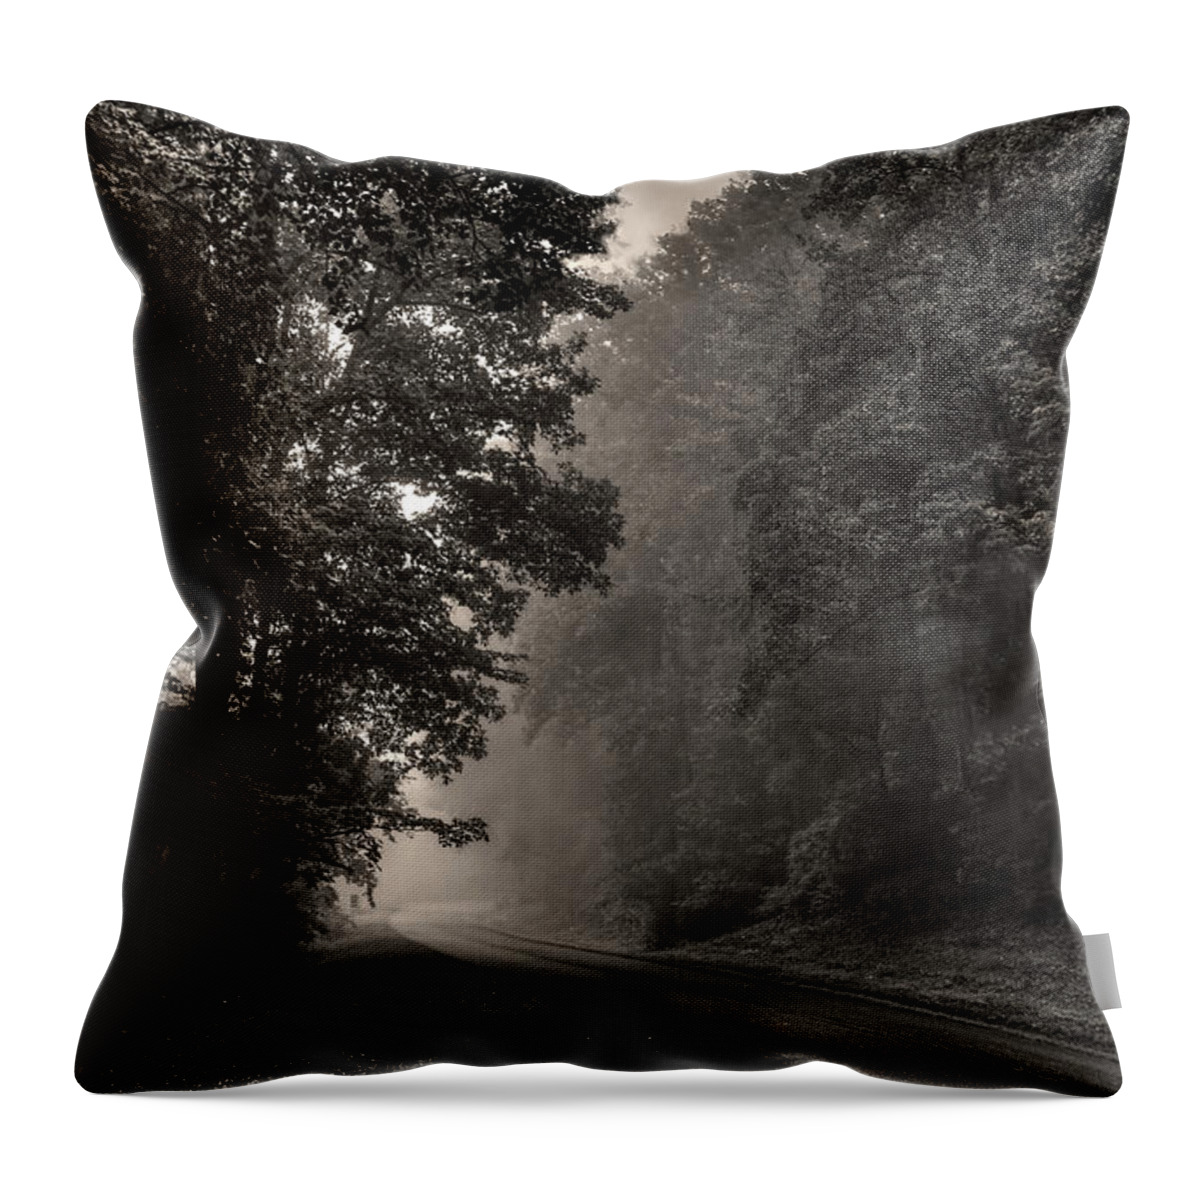 Tranquility Throw Pillow featuring the photograph Forest Path by Maria Jaeger Photography